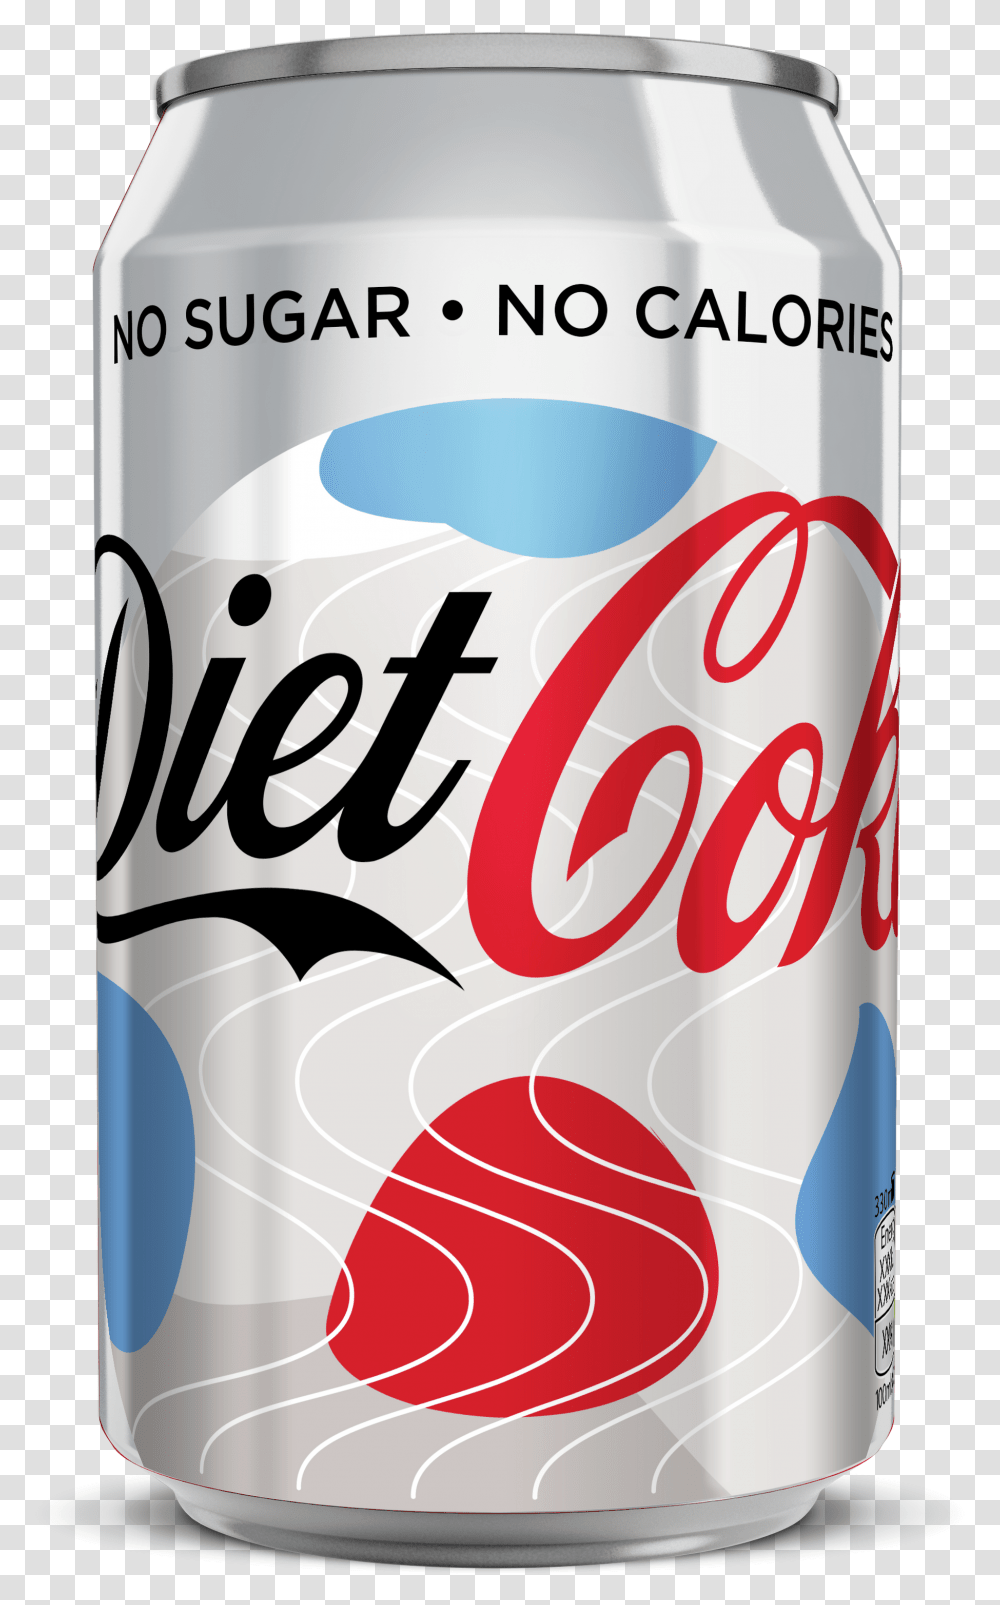 The Packs Were Designed To Be Iconic Stylish Fashion Absolutely Fabulous Diet Coke, Beverage, Drink, Soda, Coca Transparent Png